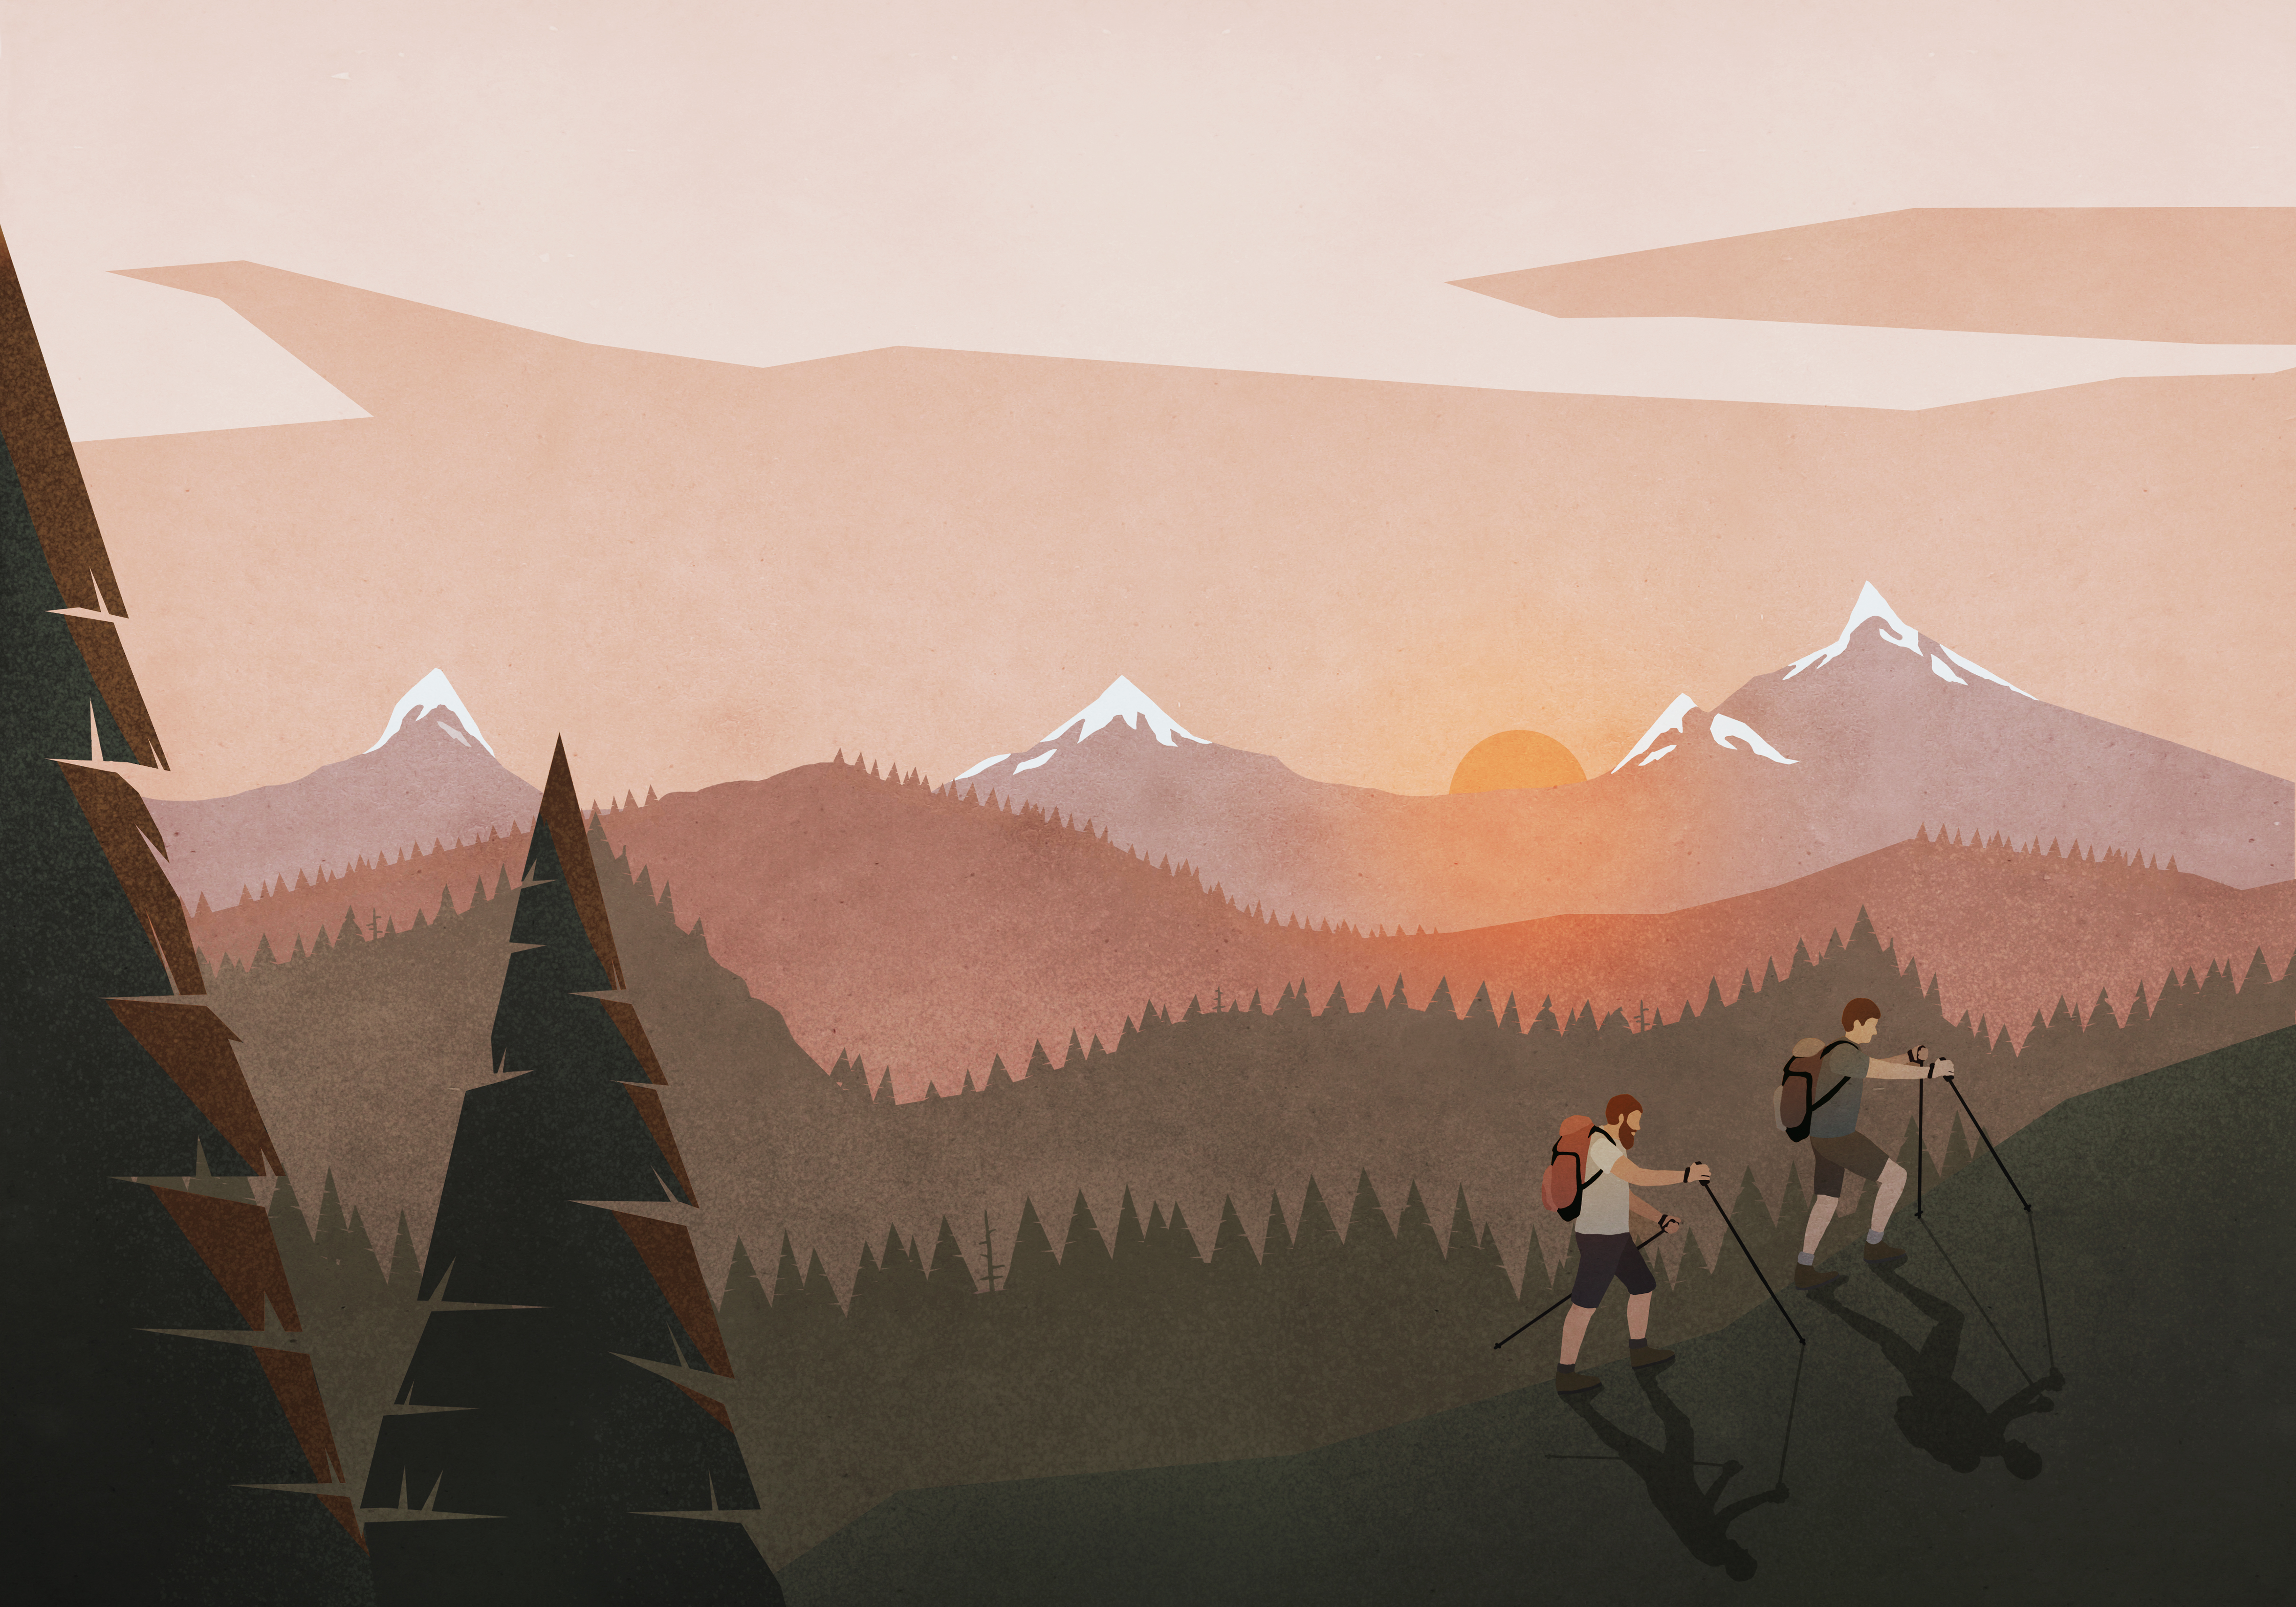 An illustration of two people hiking in a mountain landscape.